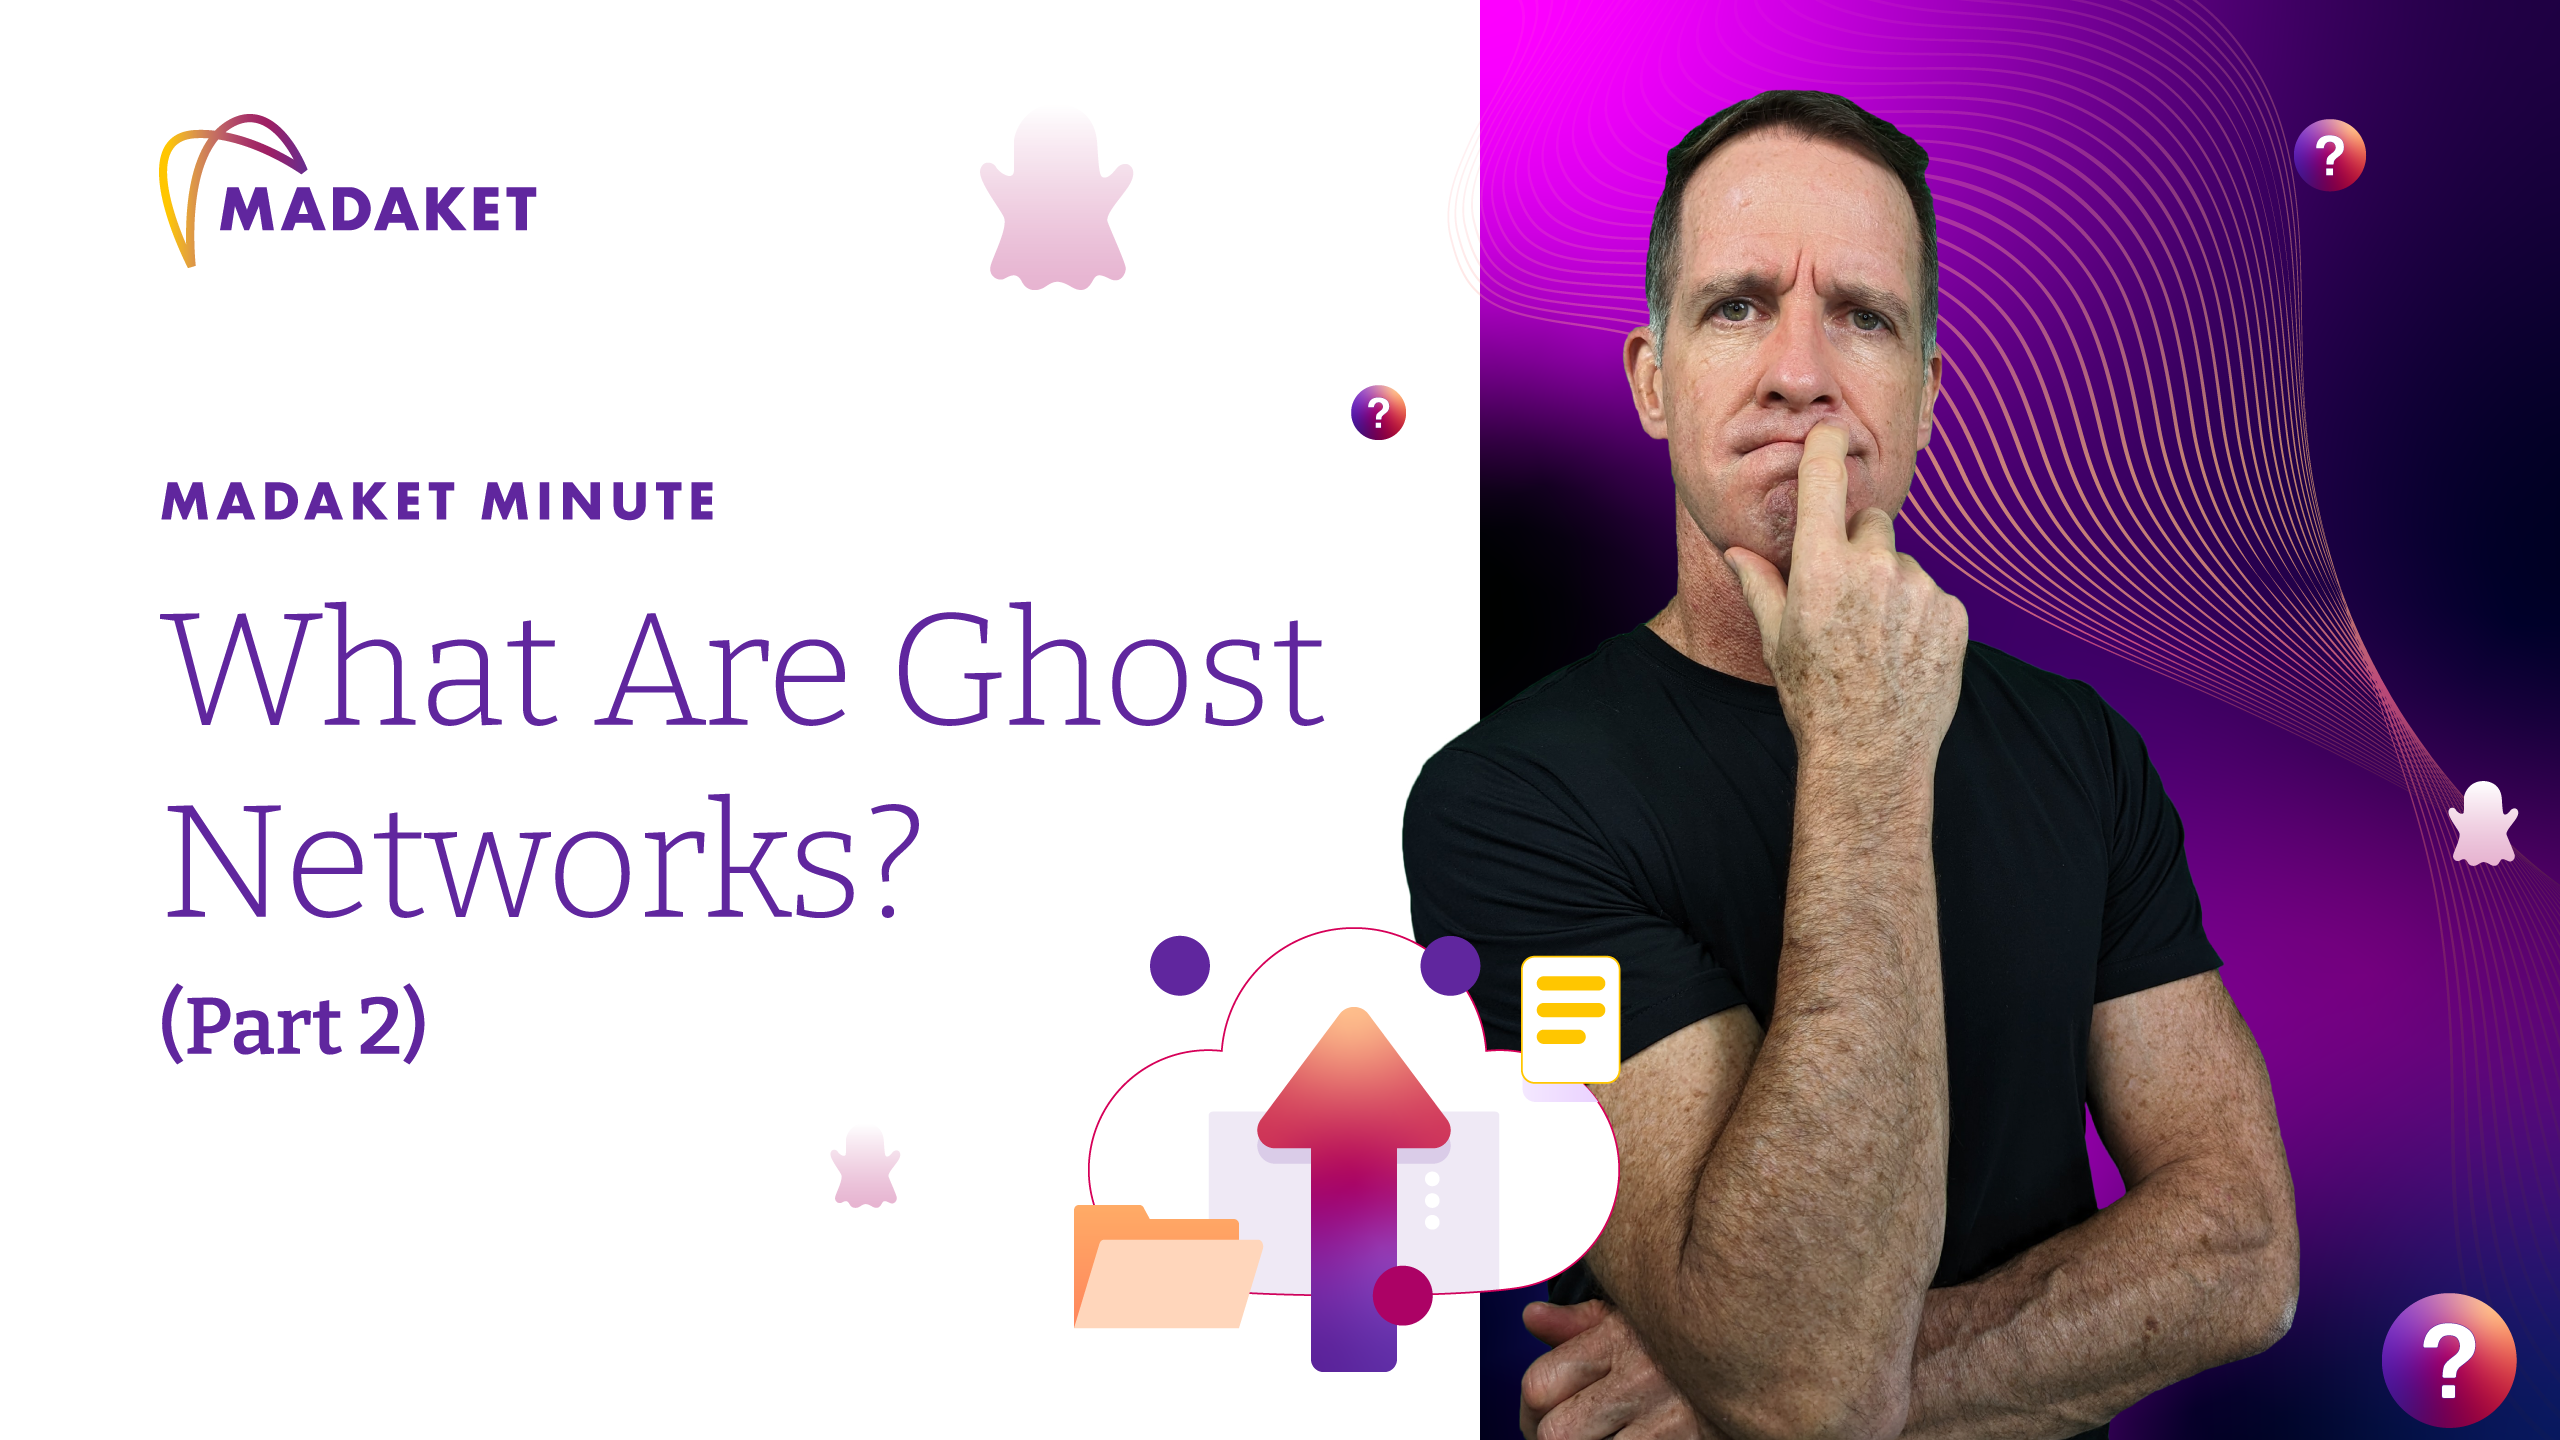 Madaket Minute Thumbnail for What Are Ghost Networks? (Part 2)